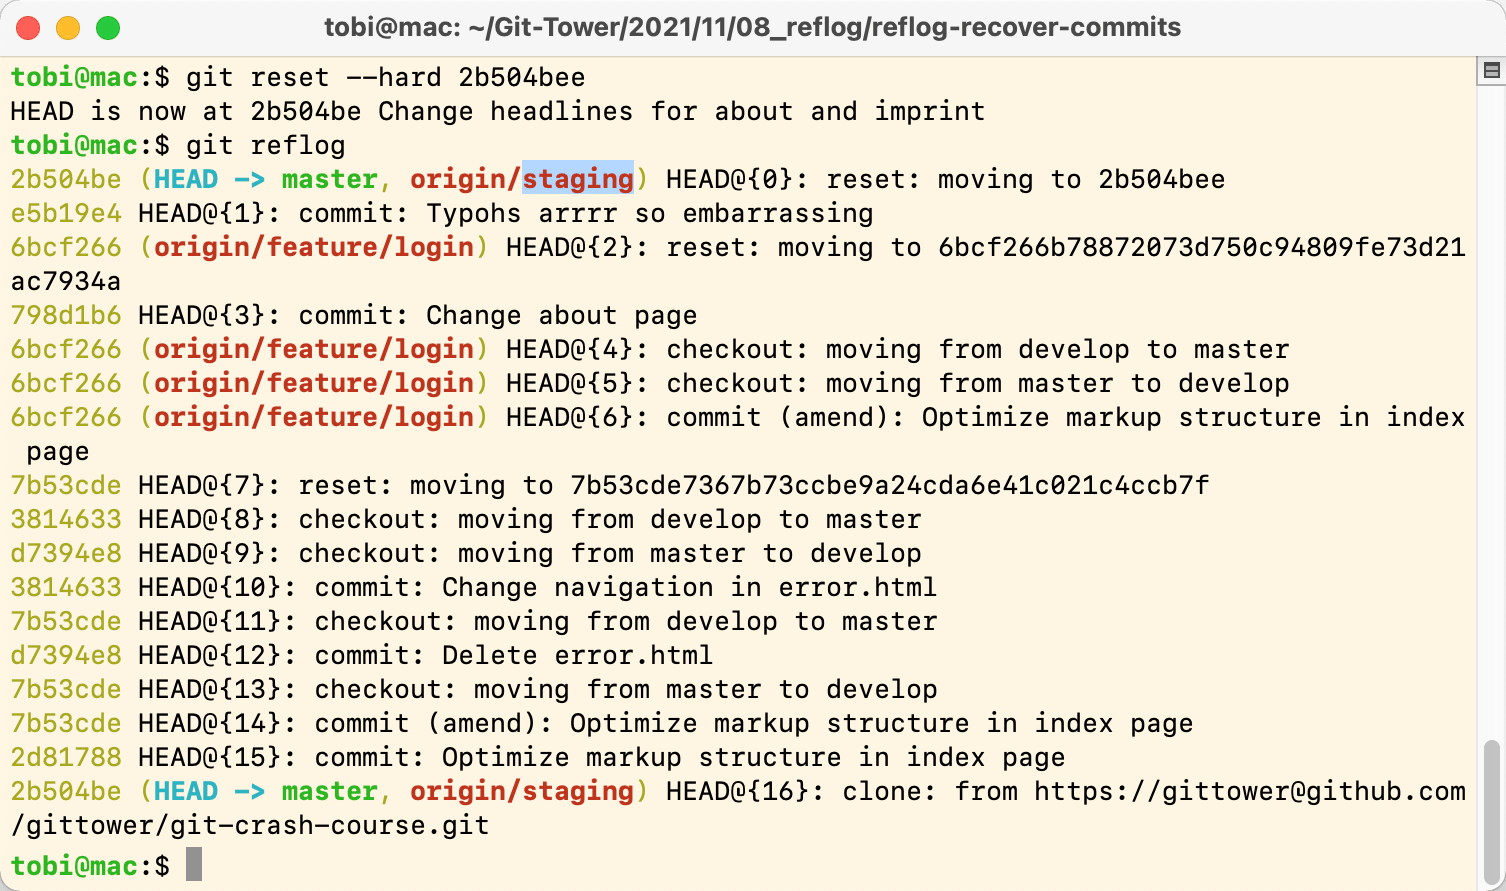 Screenshot of an open Terminal window with a light yellow background. The text is mainly black, but some words are highlighted in red, light blue and bright green. The top line is the git reset --hard 2b504bee command. The second line says the head is now at that commit ID. The third line is the git reflog command, which outputs the history.